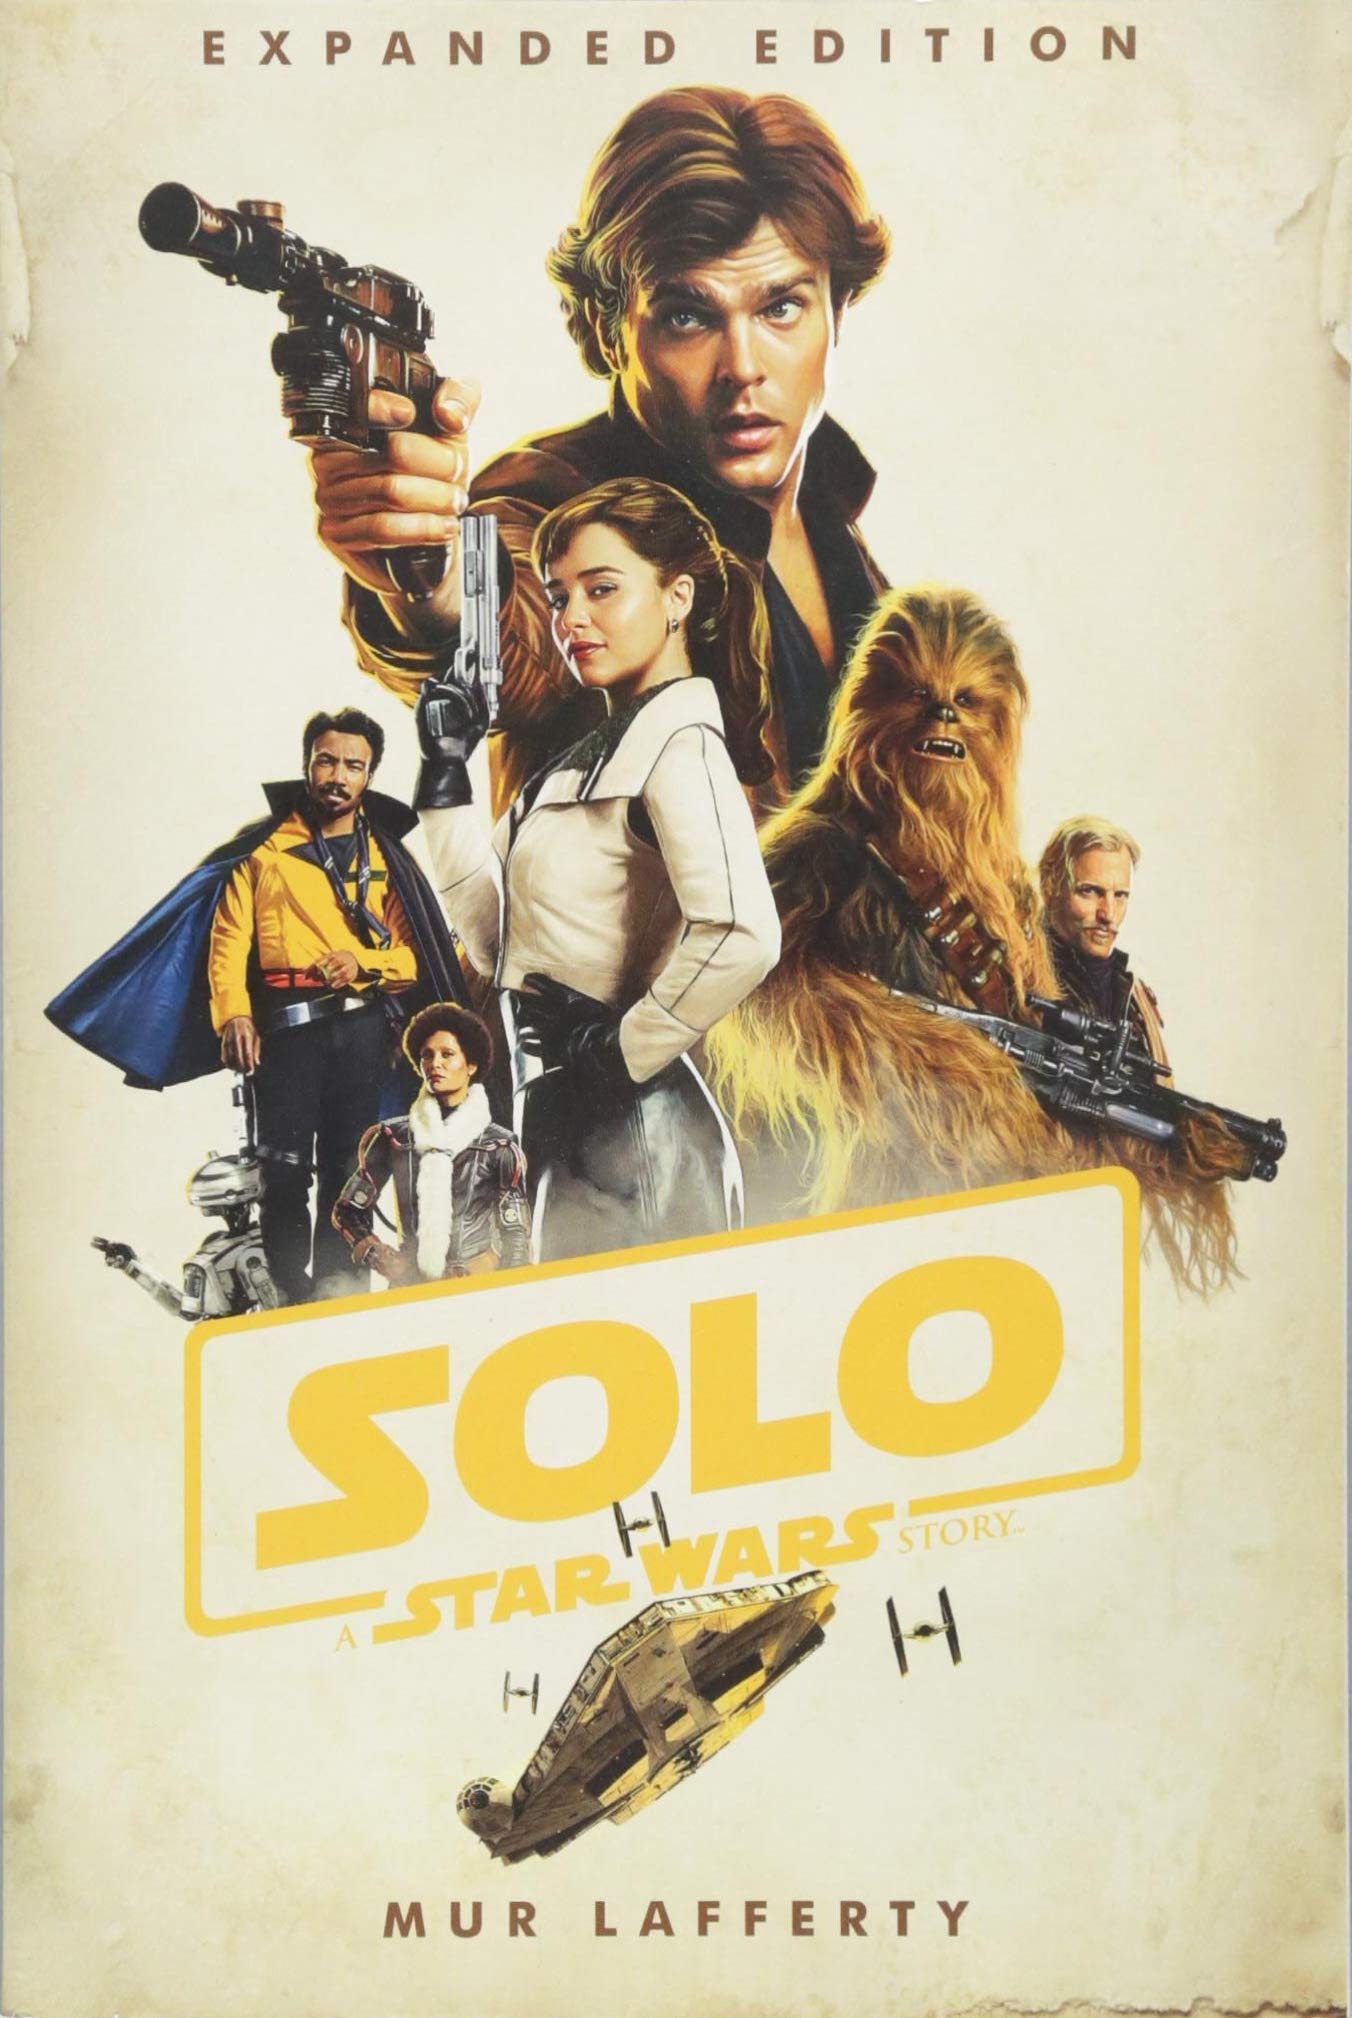 Solo: A Star Wars Story: Expanded Edition | Mur Lafferty